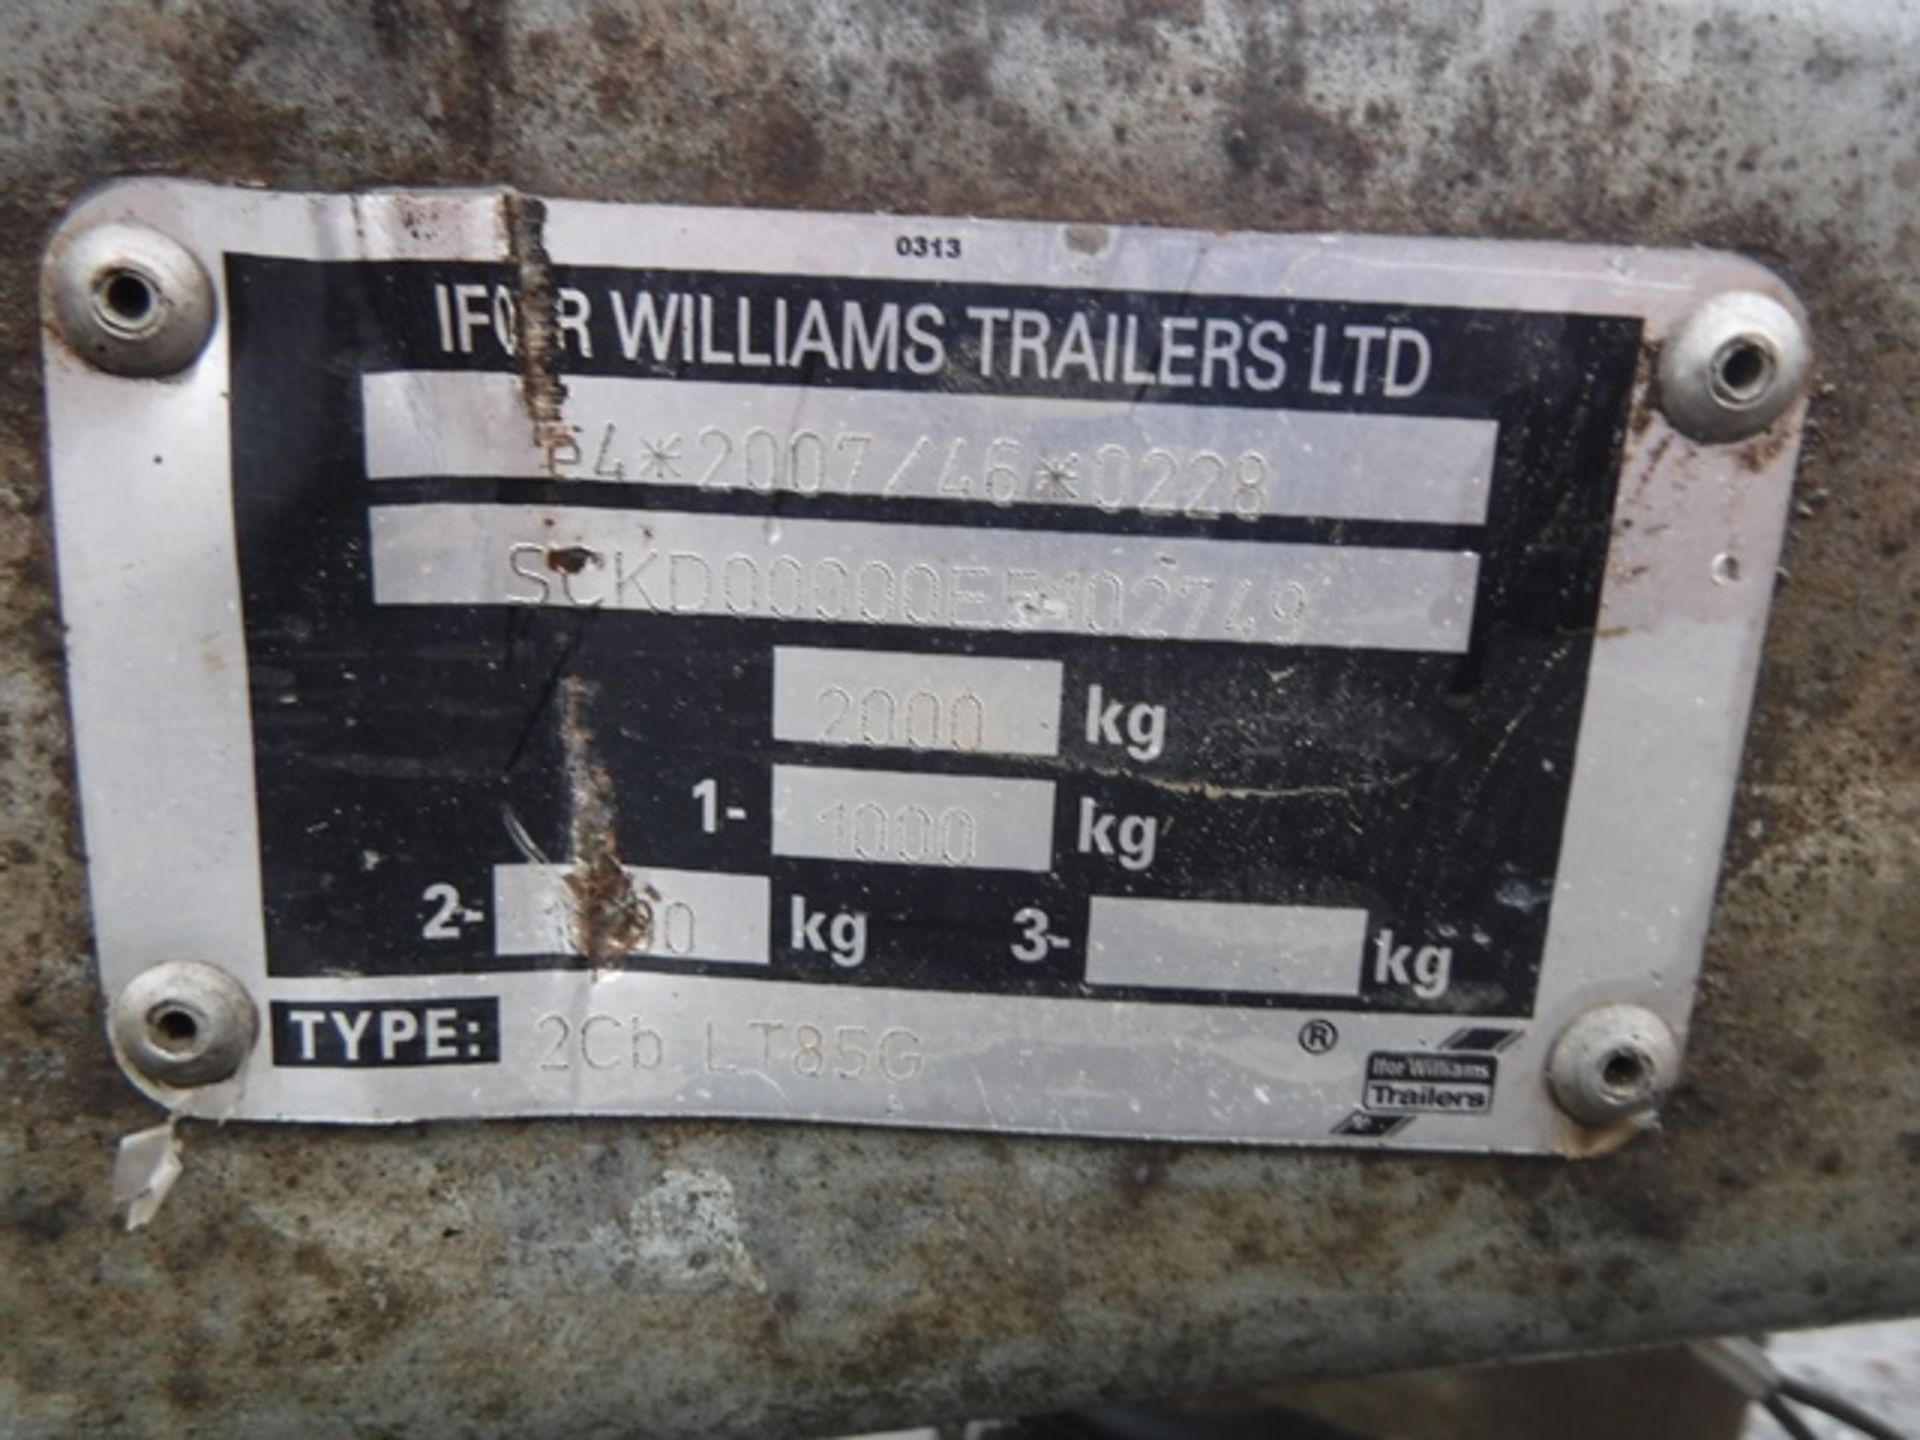 IFOR WILLIAMS 8'X5' TWIN AXLE PLANT TRAILER SNOE5402749. ASSET NO 758-S169 - Image 5 of 6